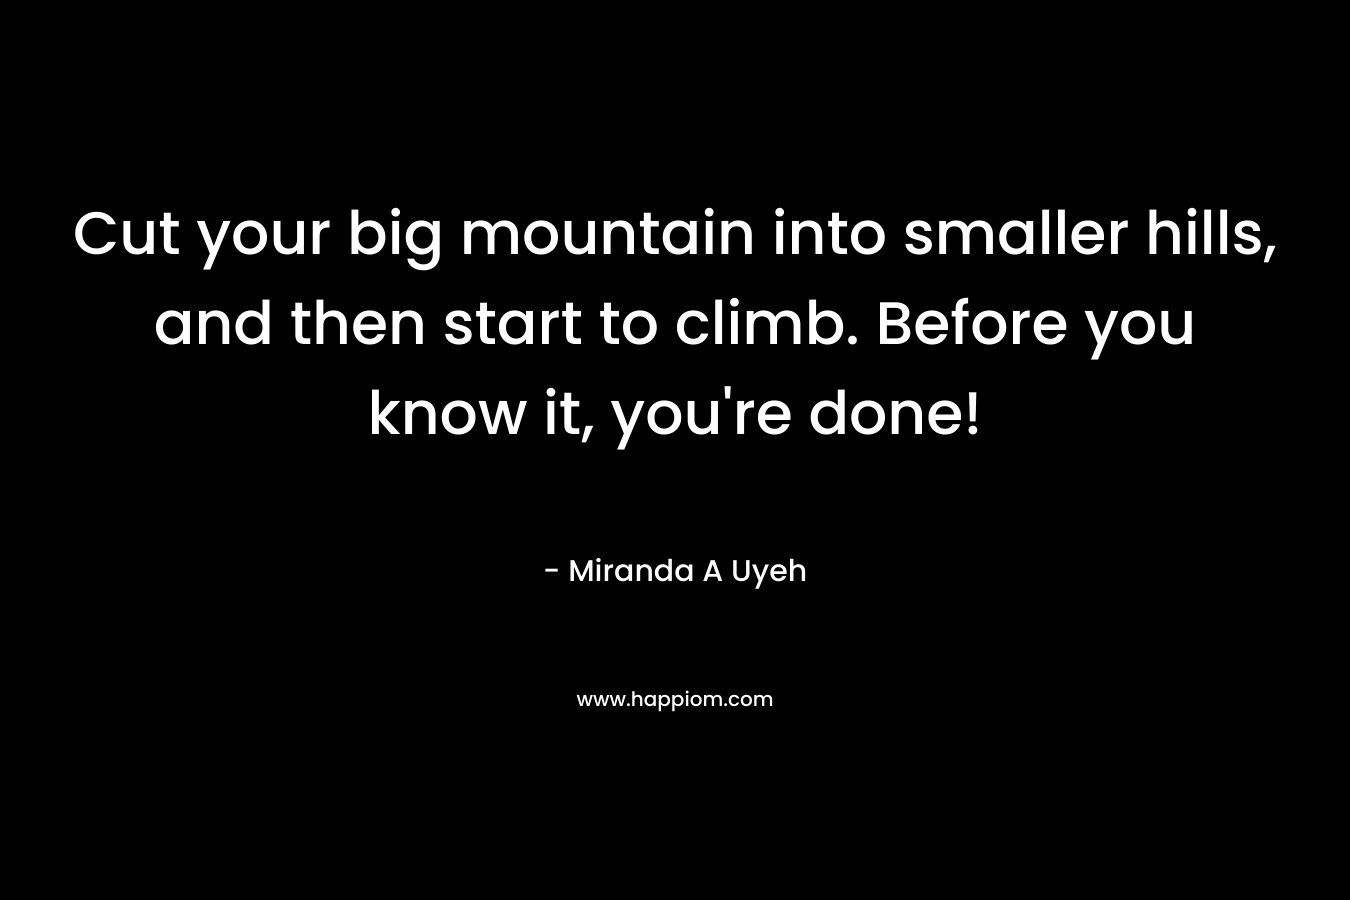 Cut your big mountain into smaller hills, and then start to climb. Before you know it, you're done!